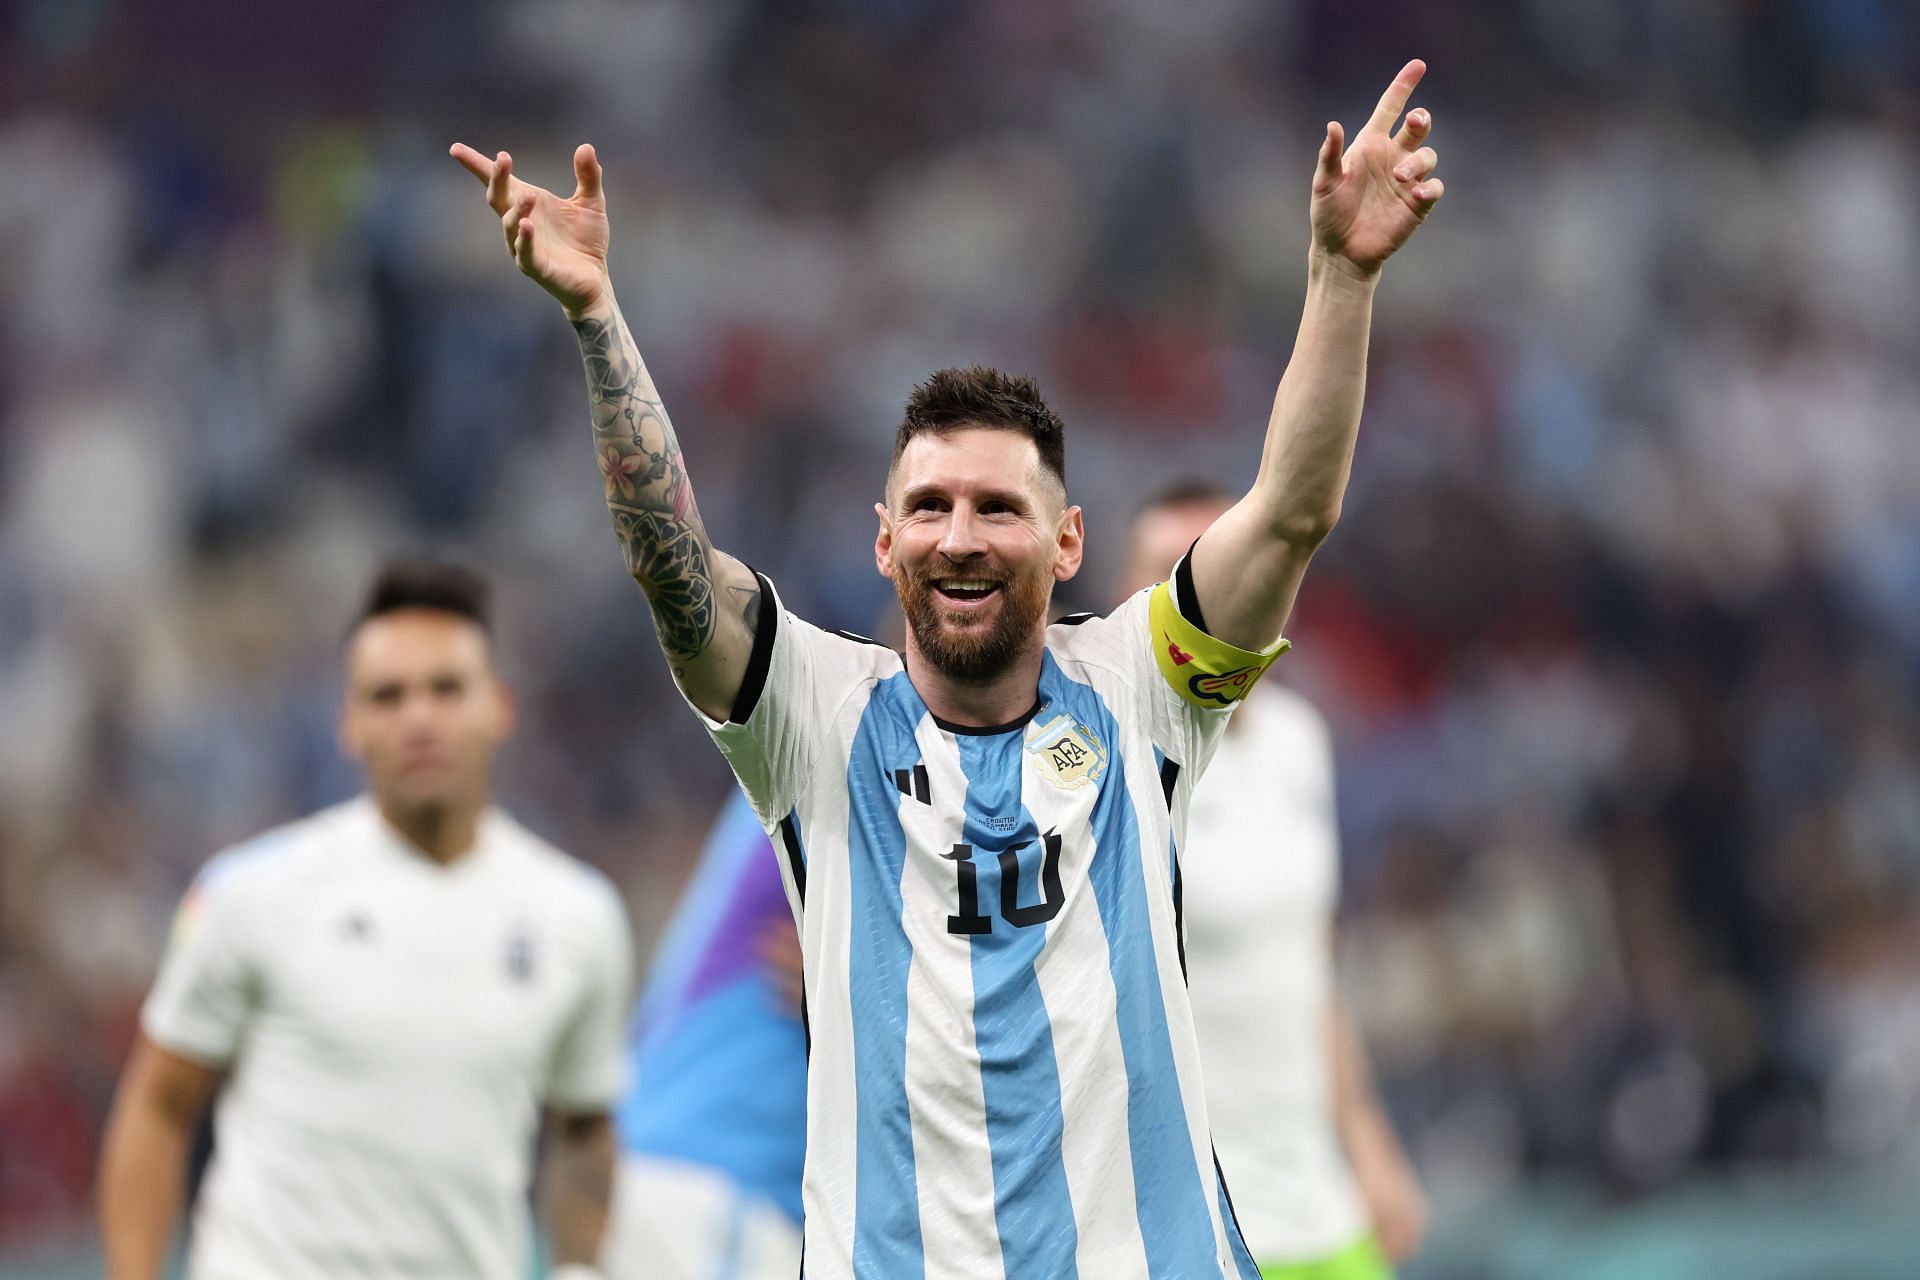 Lionel Messi can't stop making FIFA World Cup history.